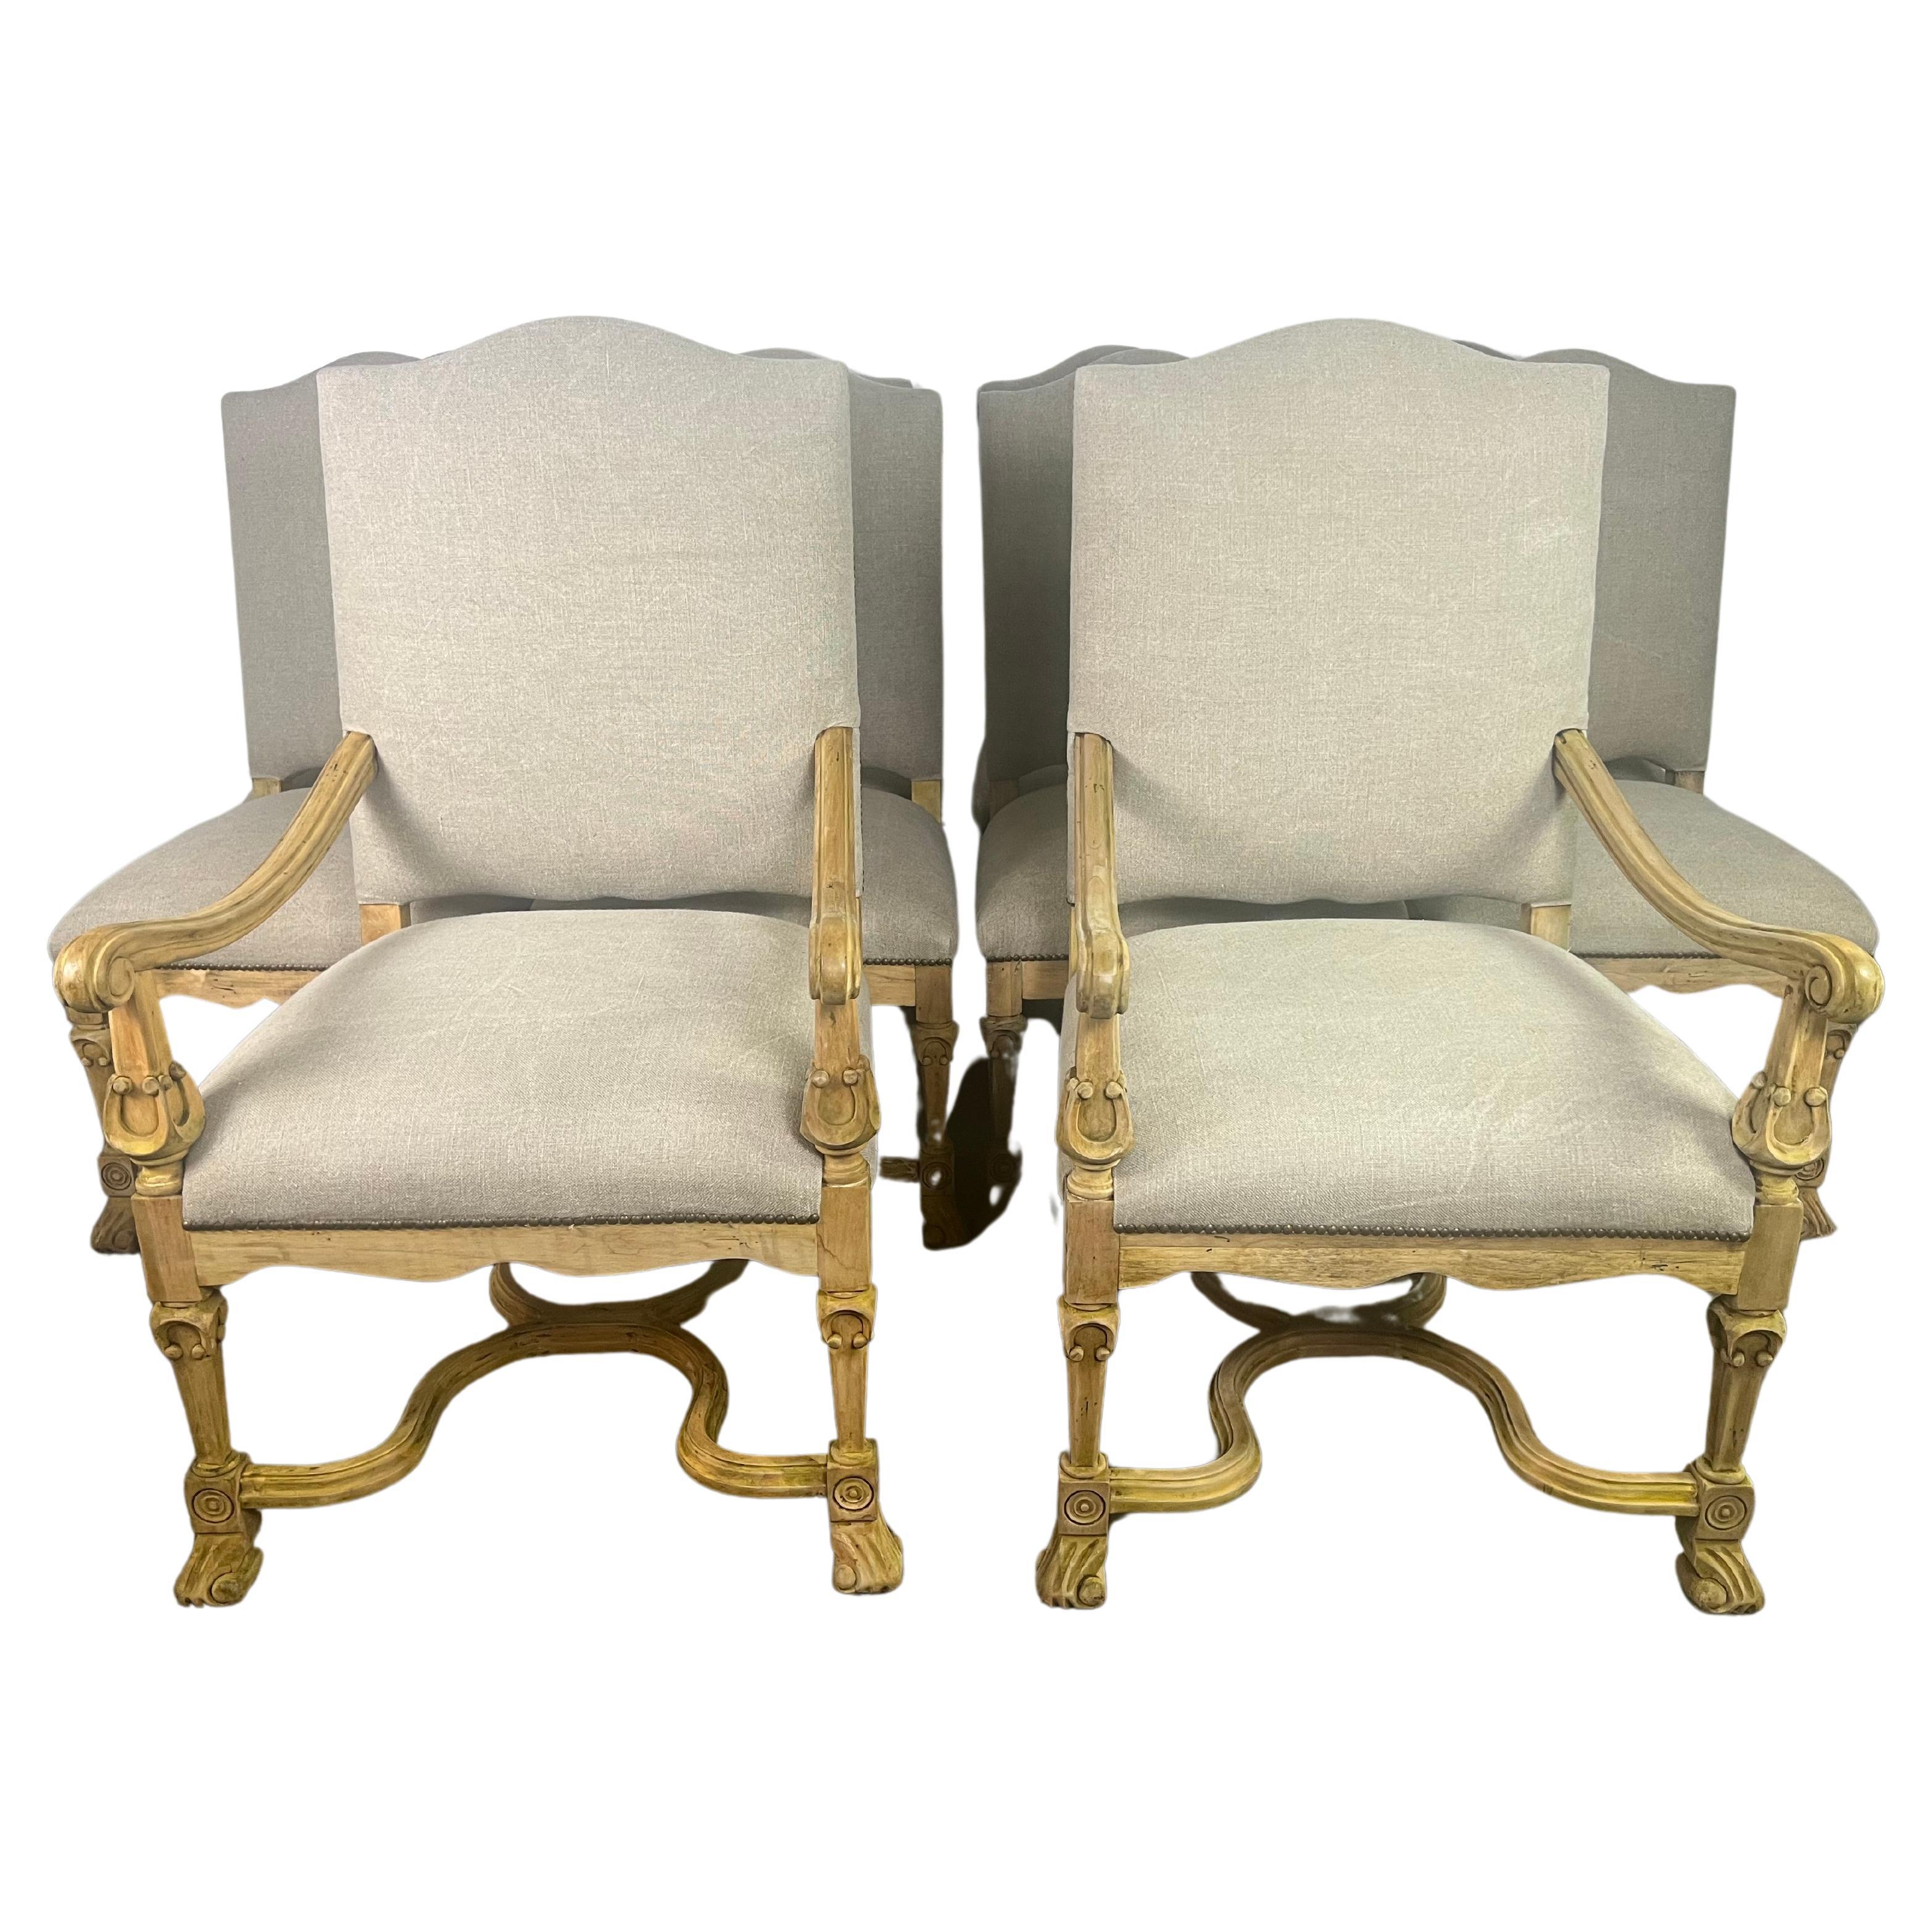 Set of Ten French Provincial Linen Upholstered Dining Chairs